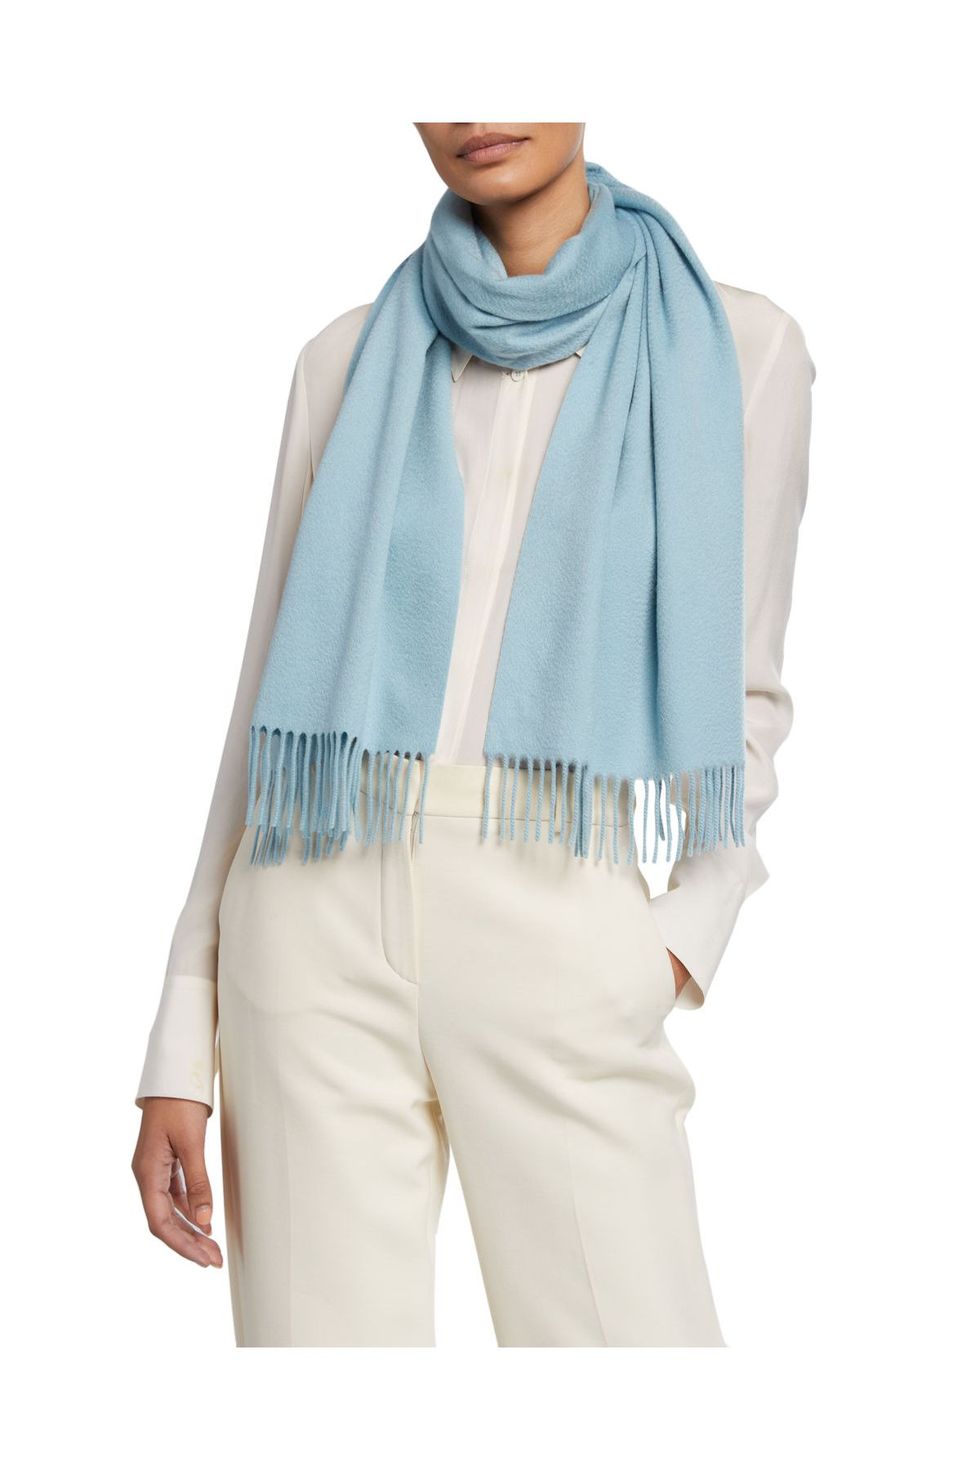 20 Best Fall Scarves 2021 — Stylish Scarves to Wear this Fall